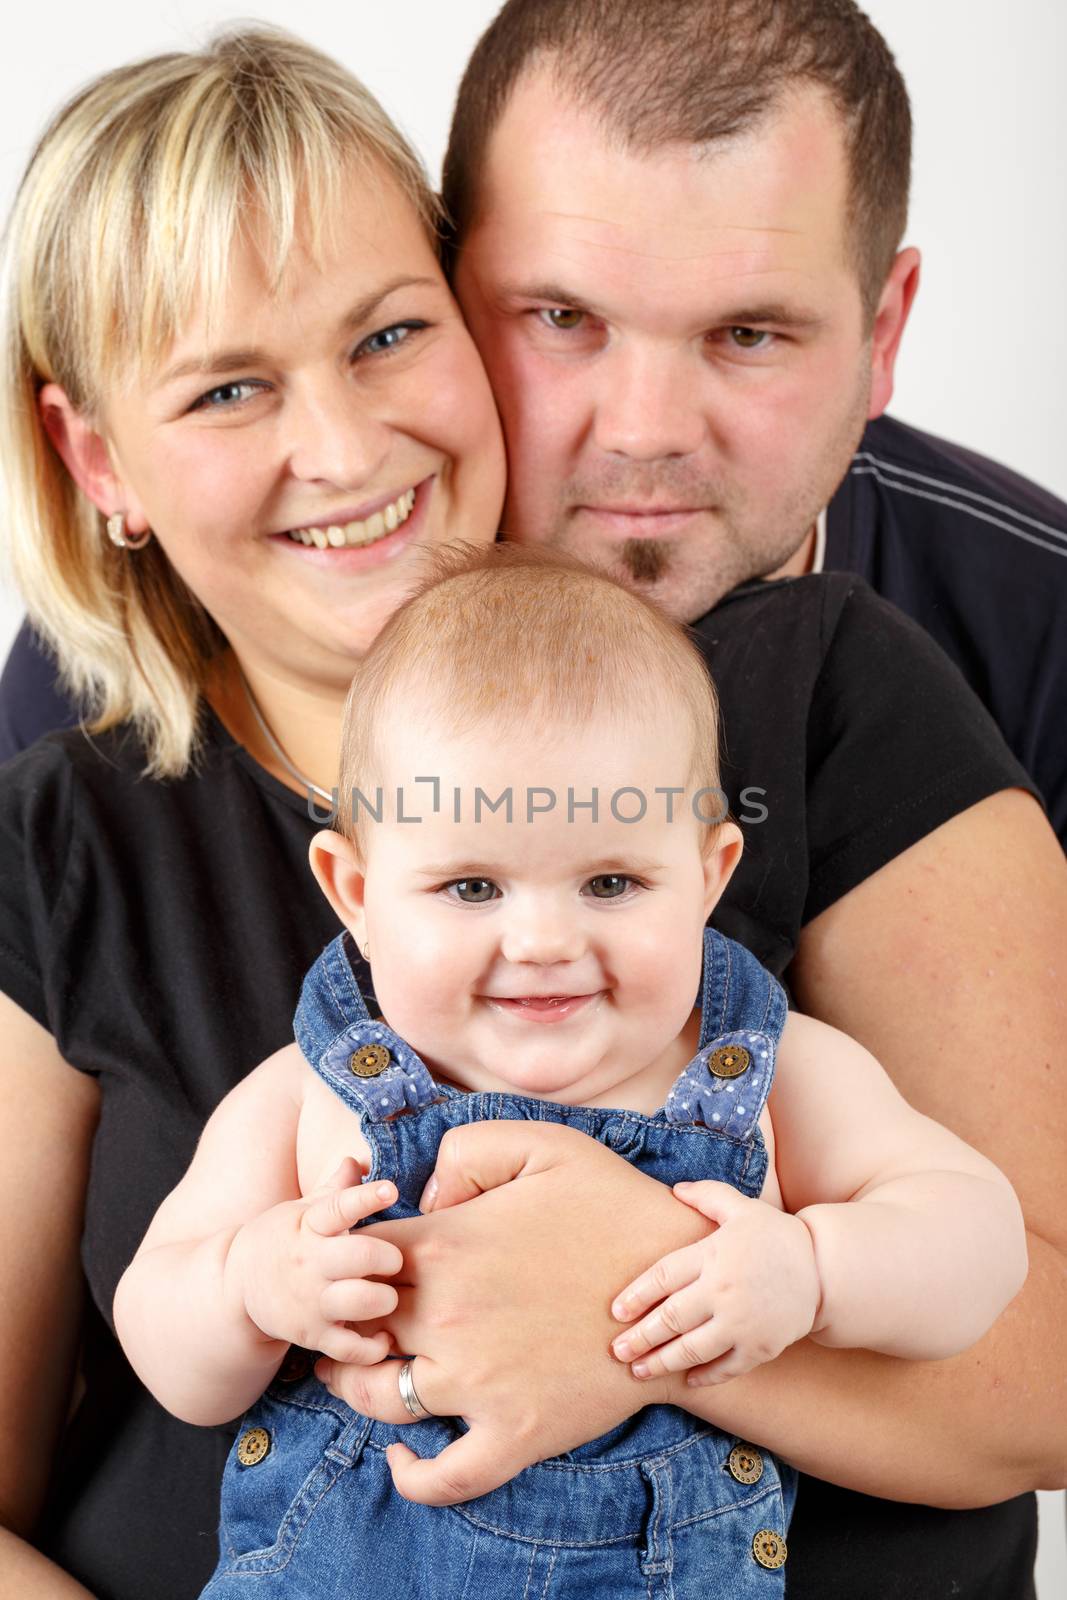 Loving mother and father embracing her baby girl by artush